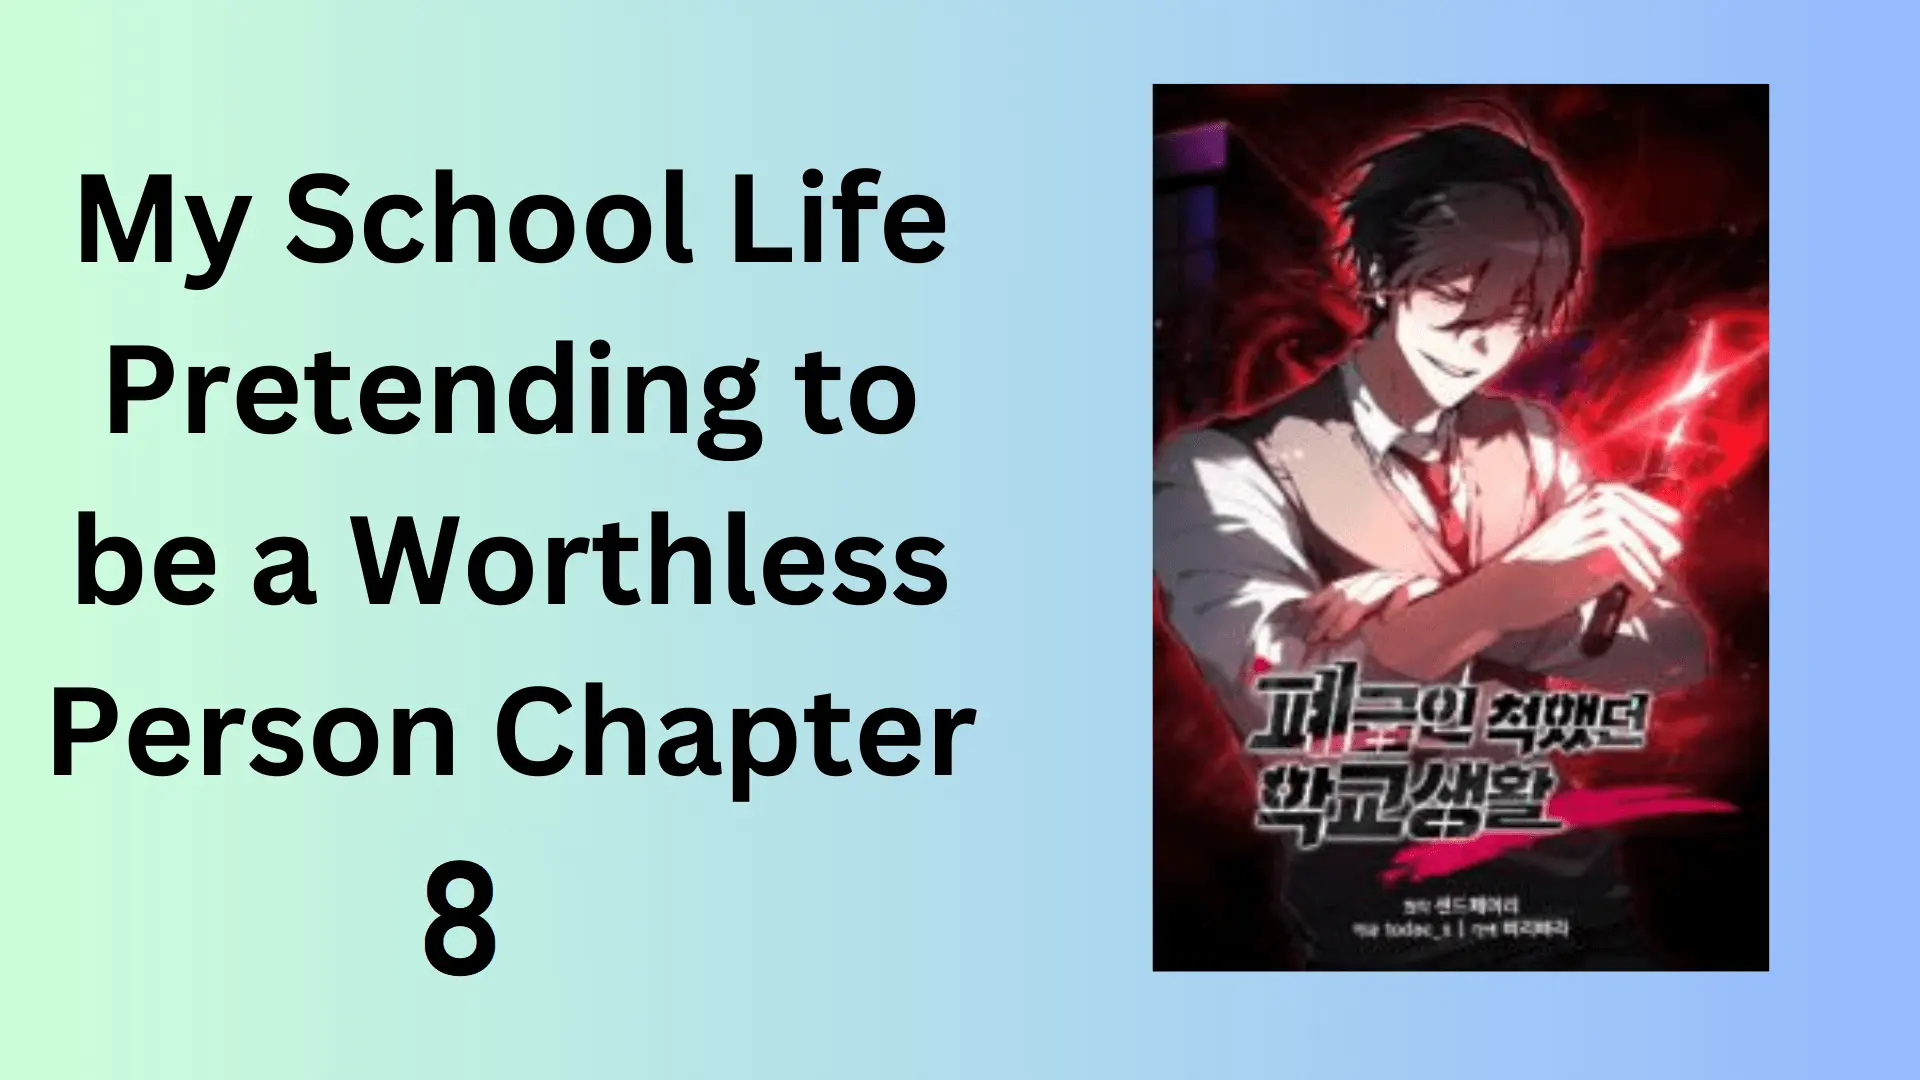 My School Life Pretending to be a Worthless Person Chapter 8